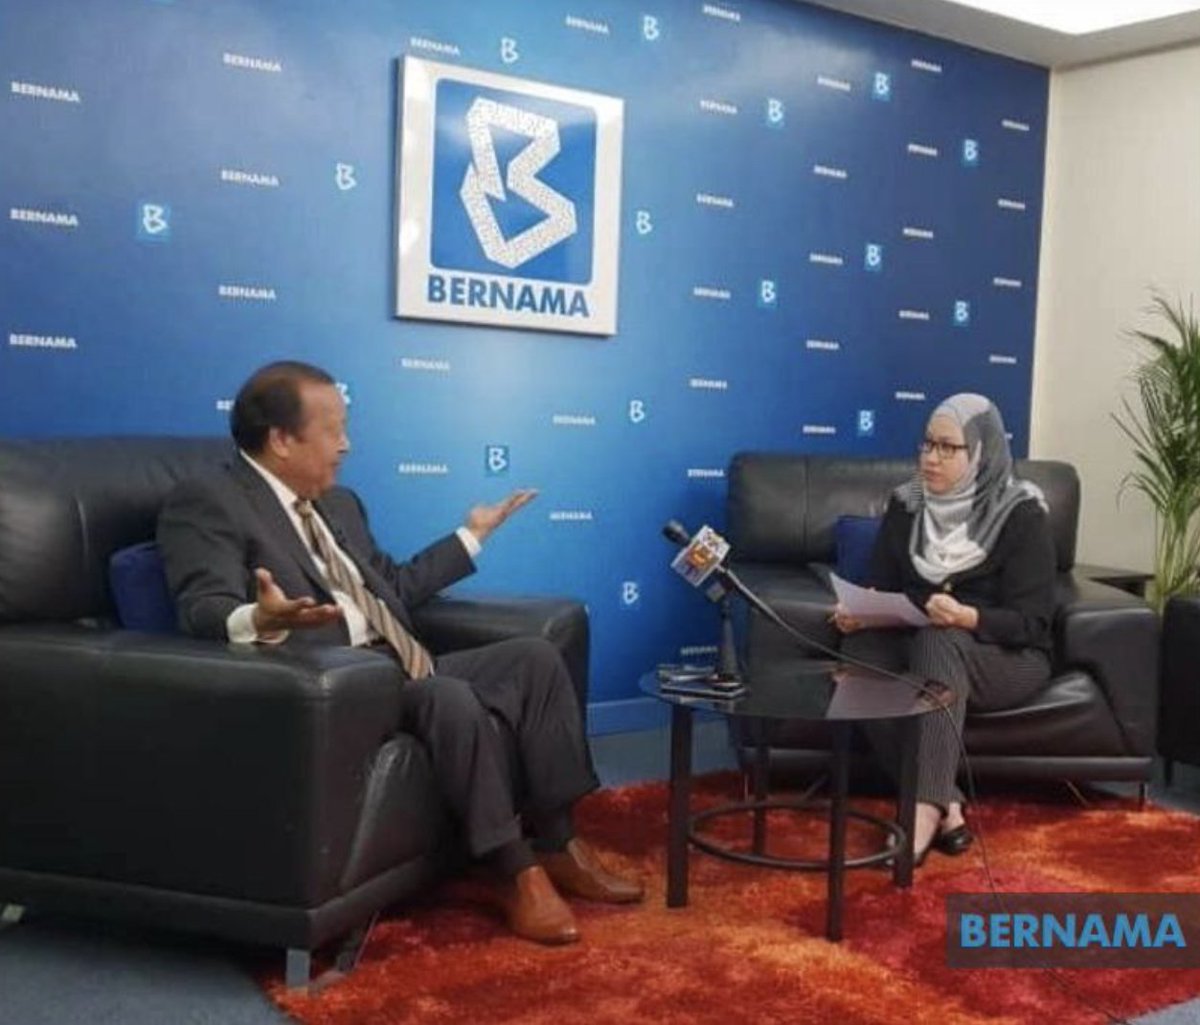 The popular TV series 'Words of Peace' featuring excerpts of Prem Rawat's talks and interviews, returns this Sunday at 8:30 PM to Kuala Lumpur's Bernama TV channel! Learn more:zurl.co/D7LY 

#PremRawat #WordsOfPeaceTVSeries #TPRF